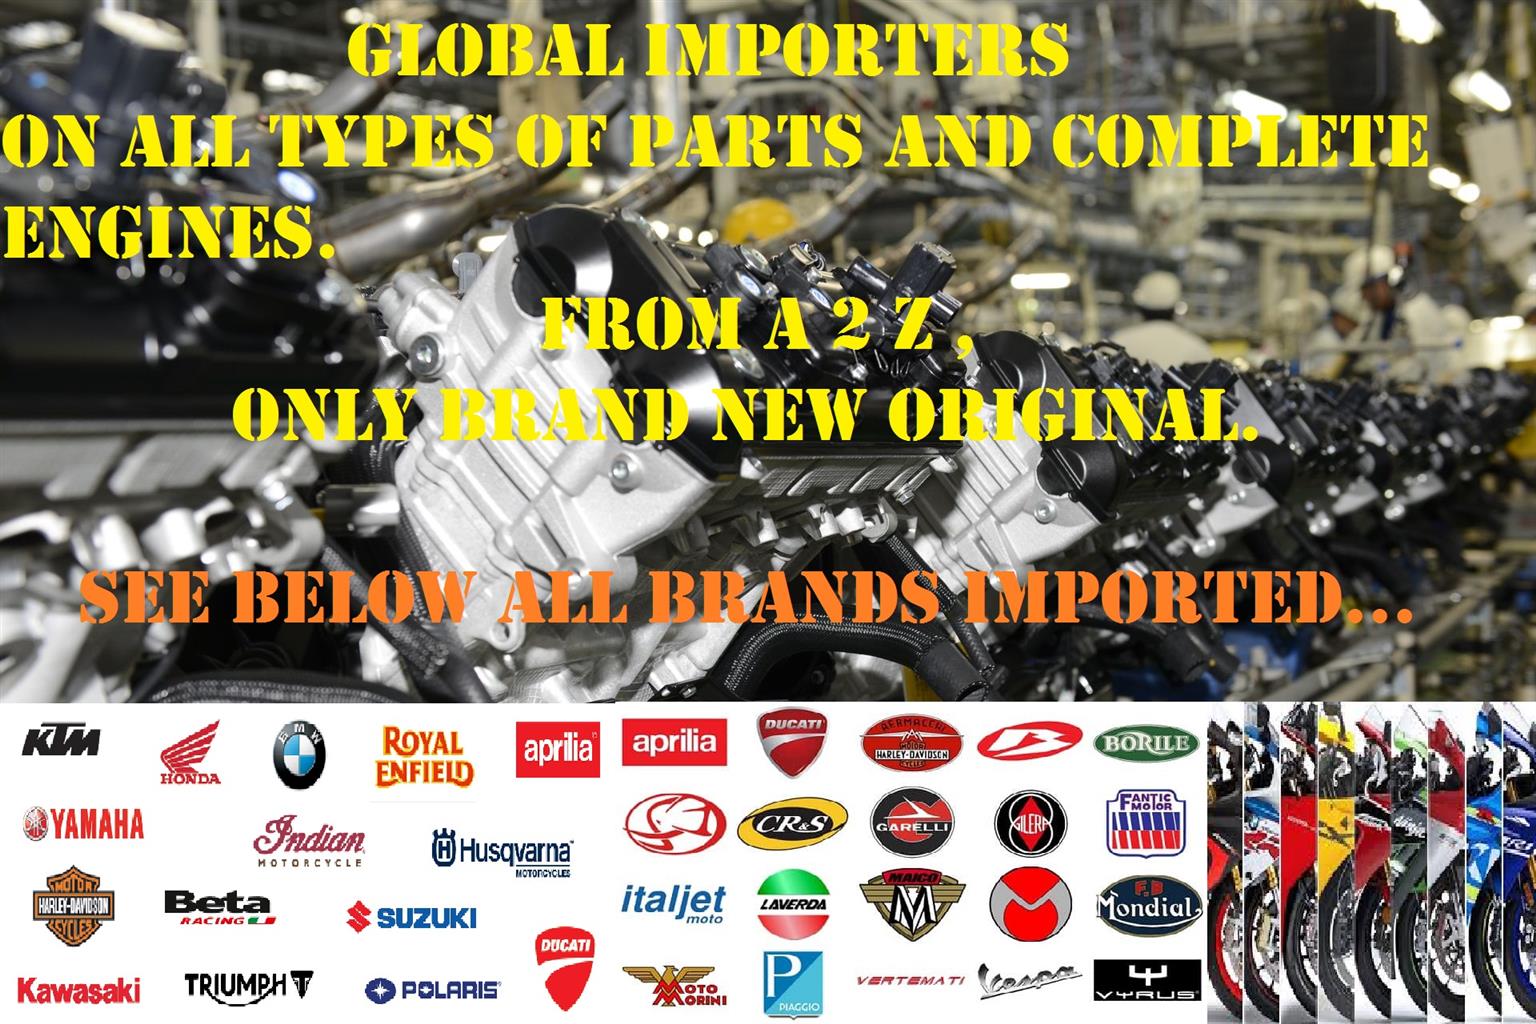 IMPORTERS ON BRAND NEW CRUISER ENGINES/SUPERBIKE ENGINES/SCOOTER ENGINES AND ALL